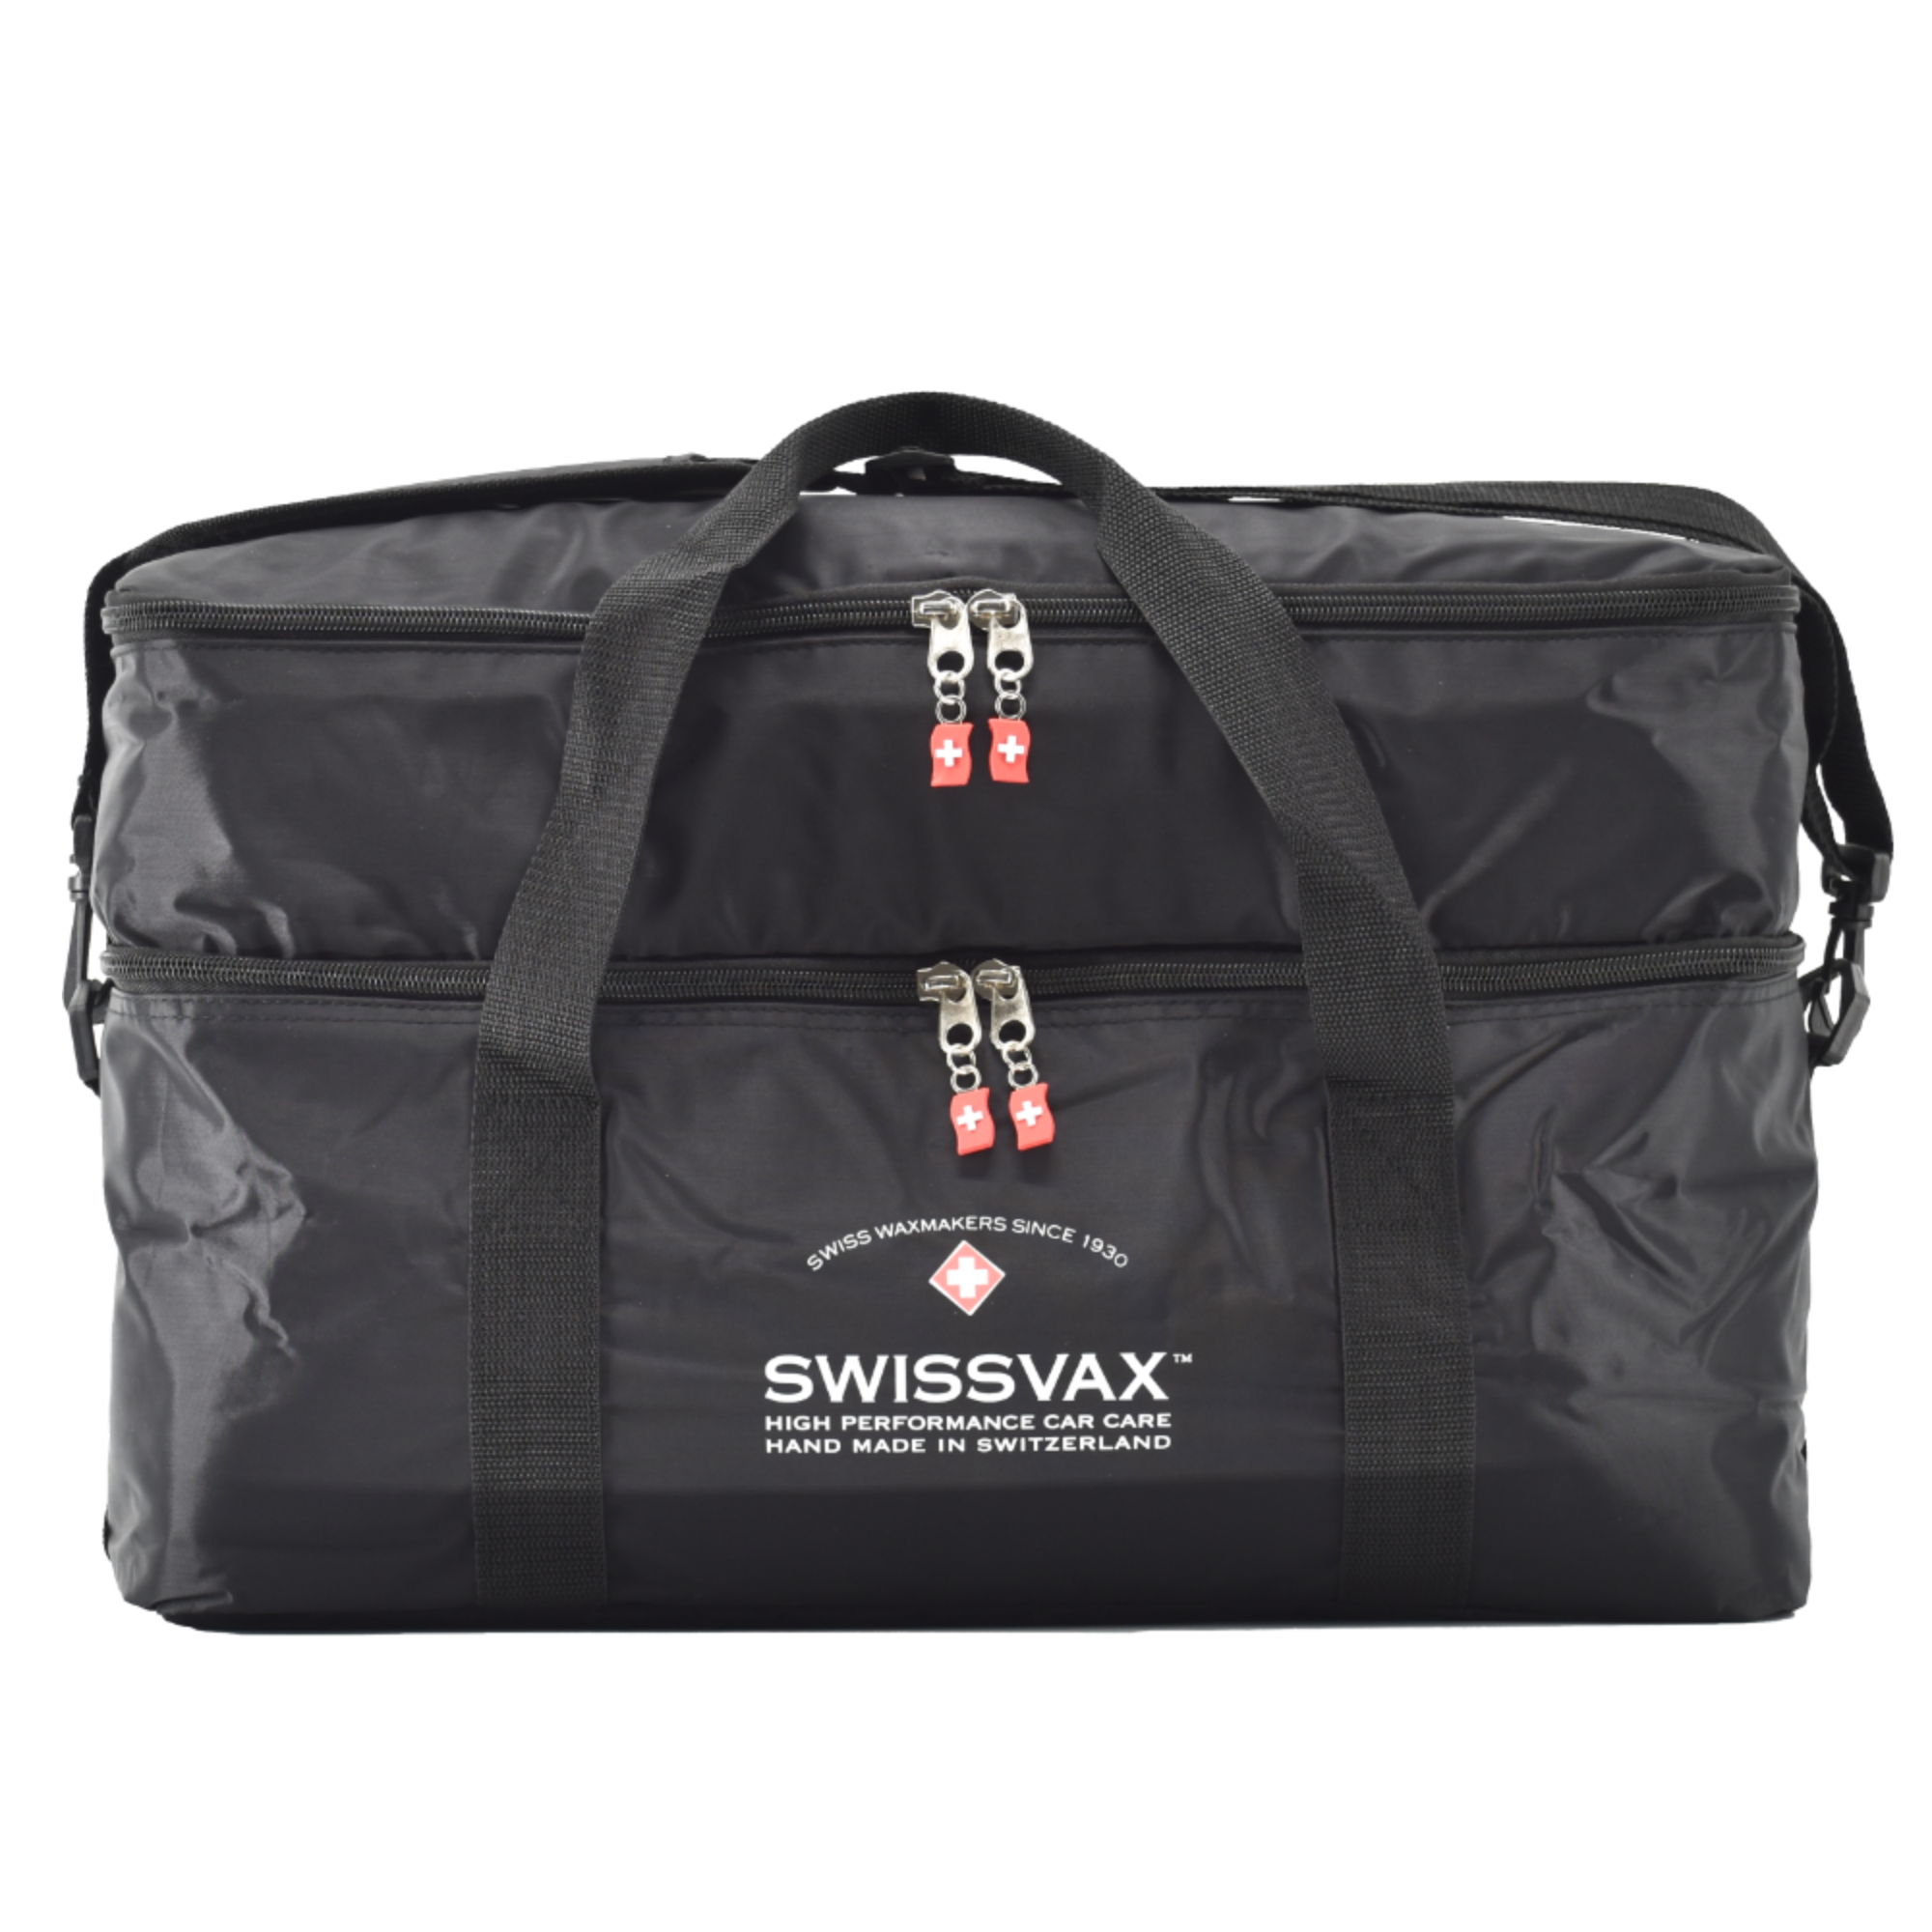 Swissvax MASTER COOLER BAG - Dual Level Thermo-insulating bag from the Master Collection